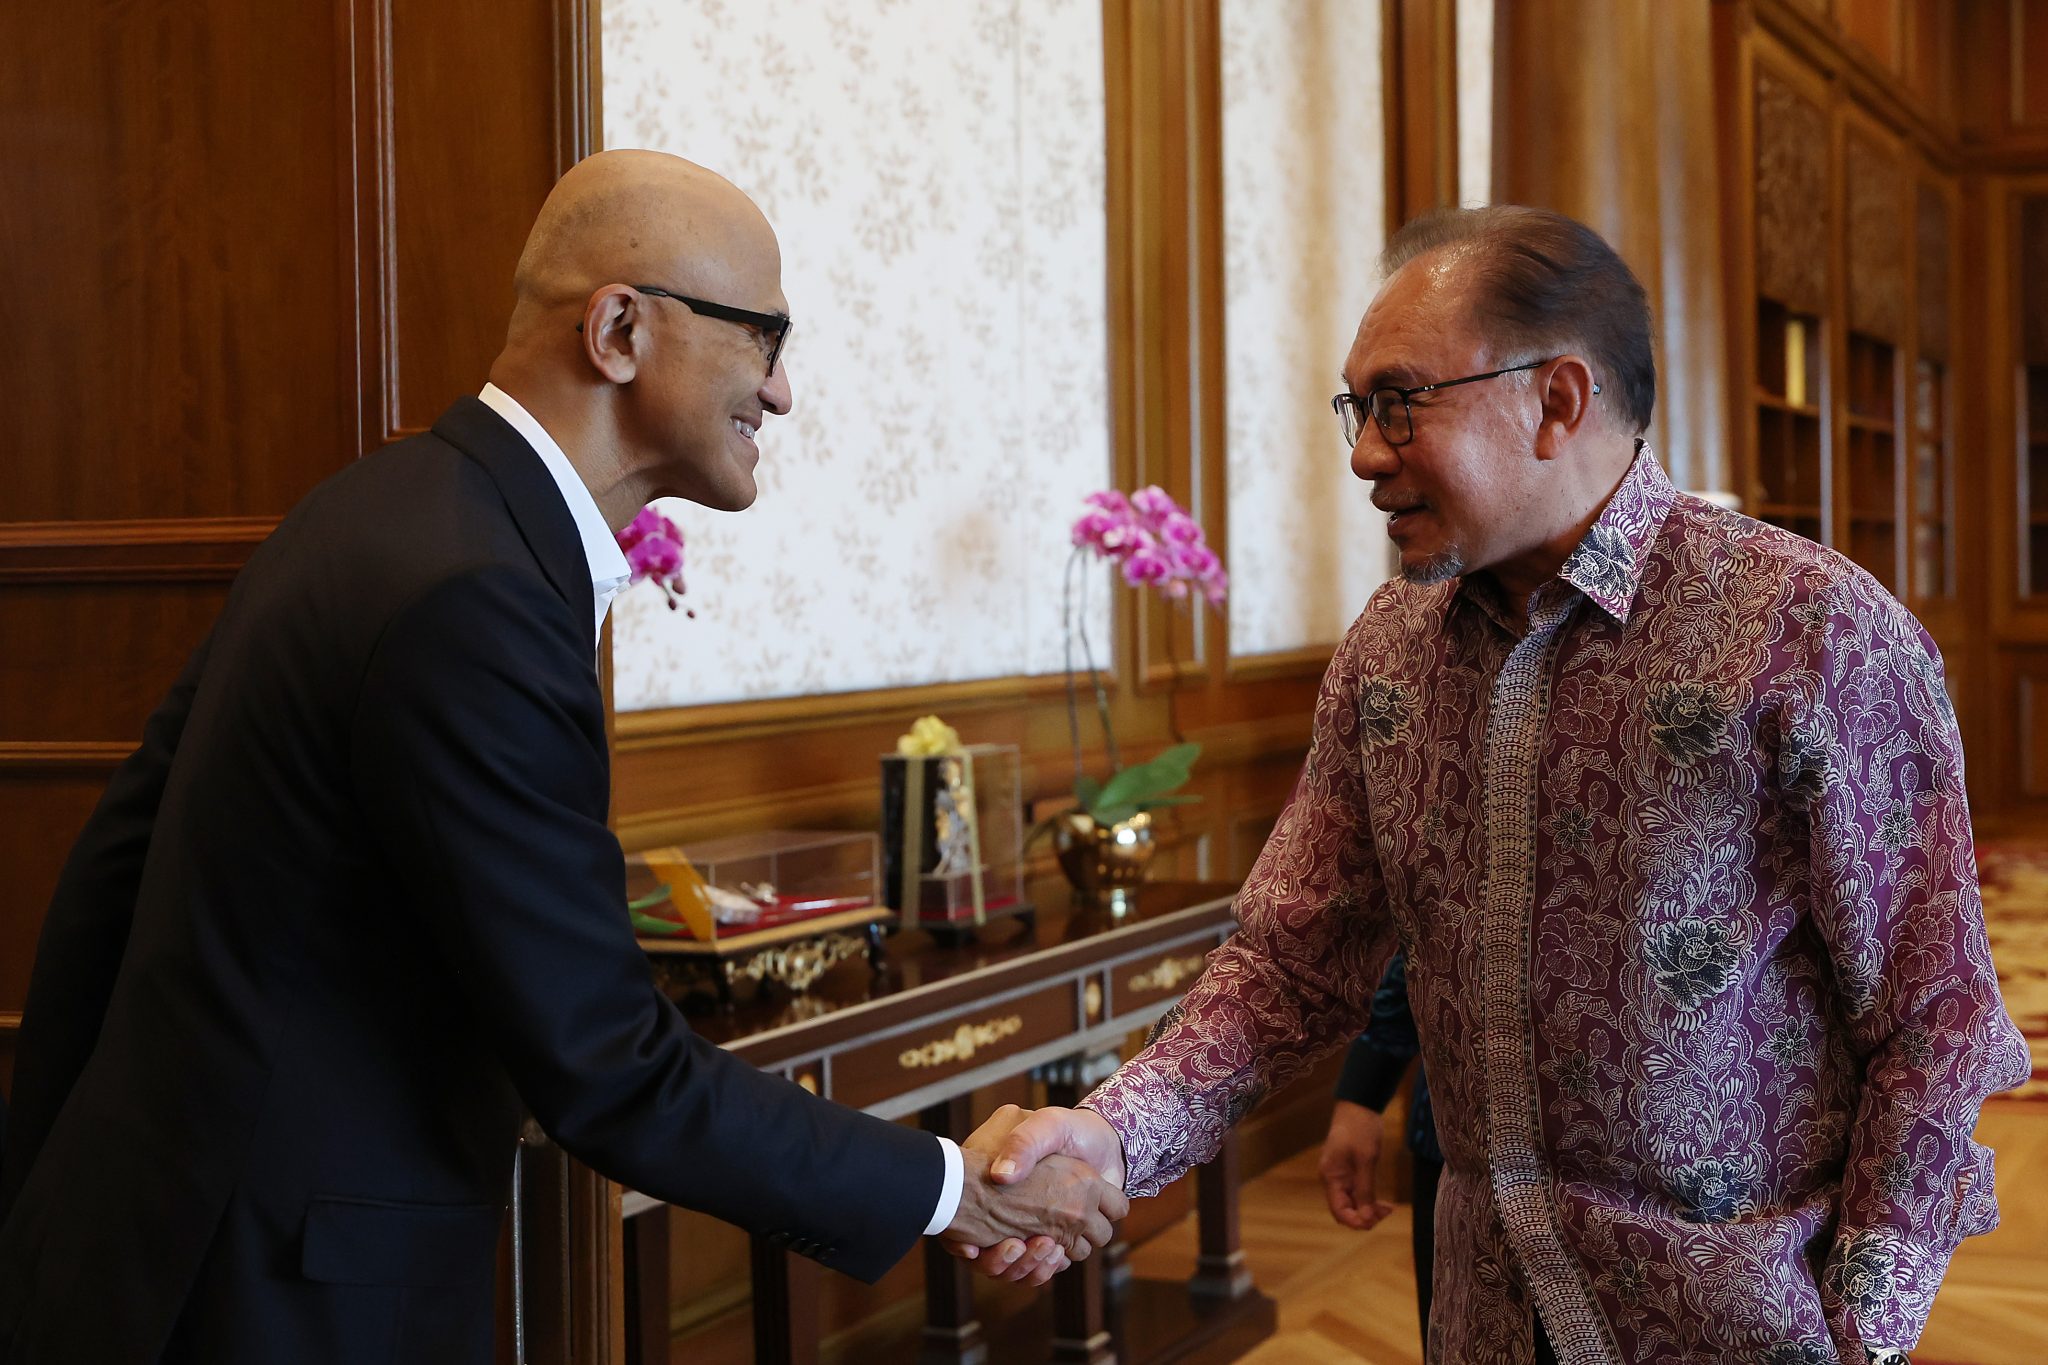 Microsoft Chairman and CEO Satya Nadella (L) meets with YAB Dato’ Seri Anwar Ibrahim, Prime Minister of Malaysia at Perdana Putra, Putrajaya in Malaysia on May 02, 2024. (Photo by Annice Lyn/Getty Images for Microsoft)